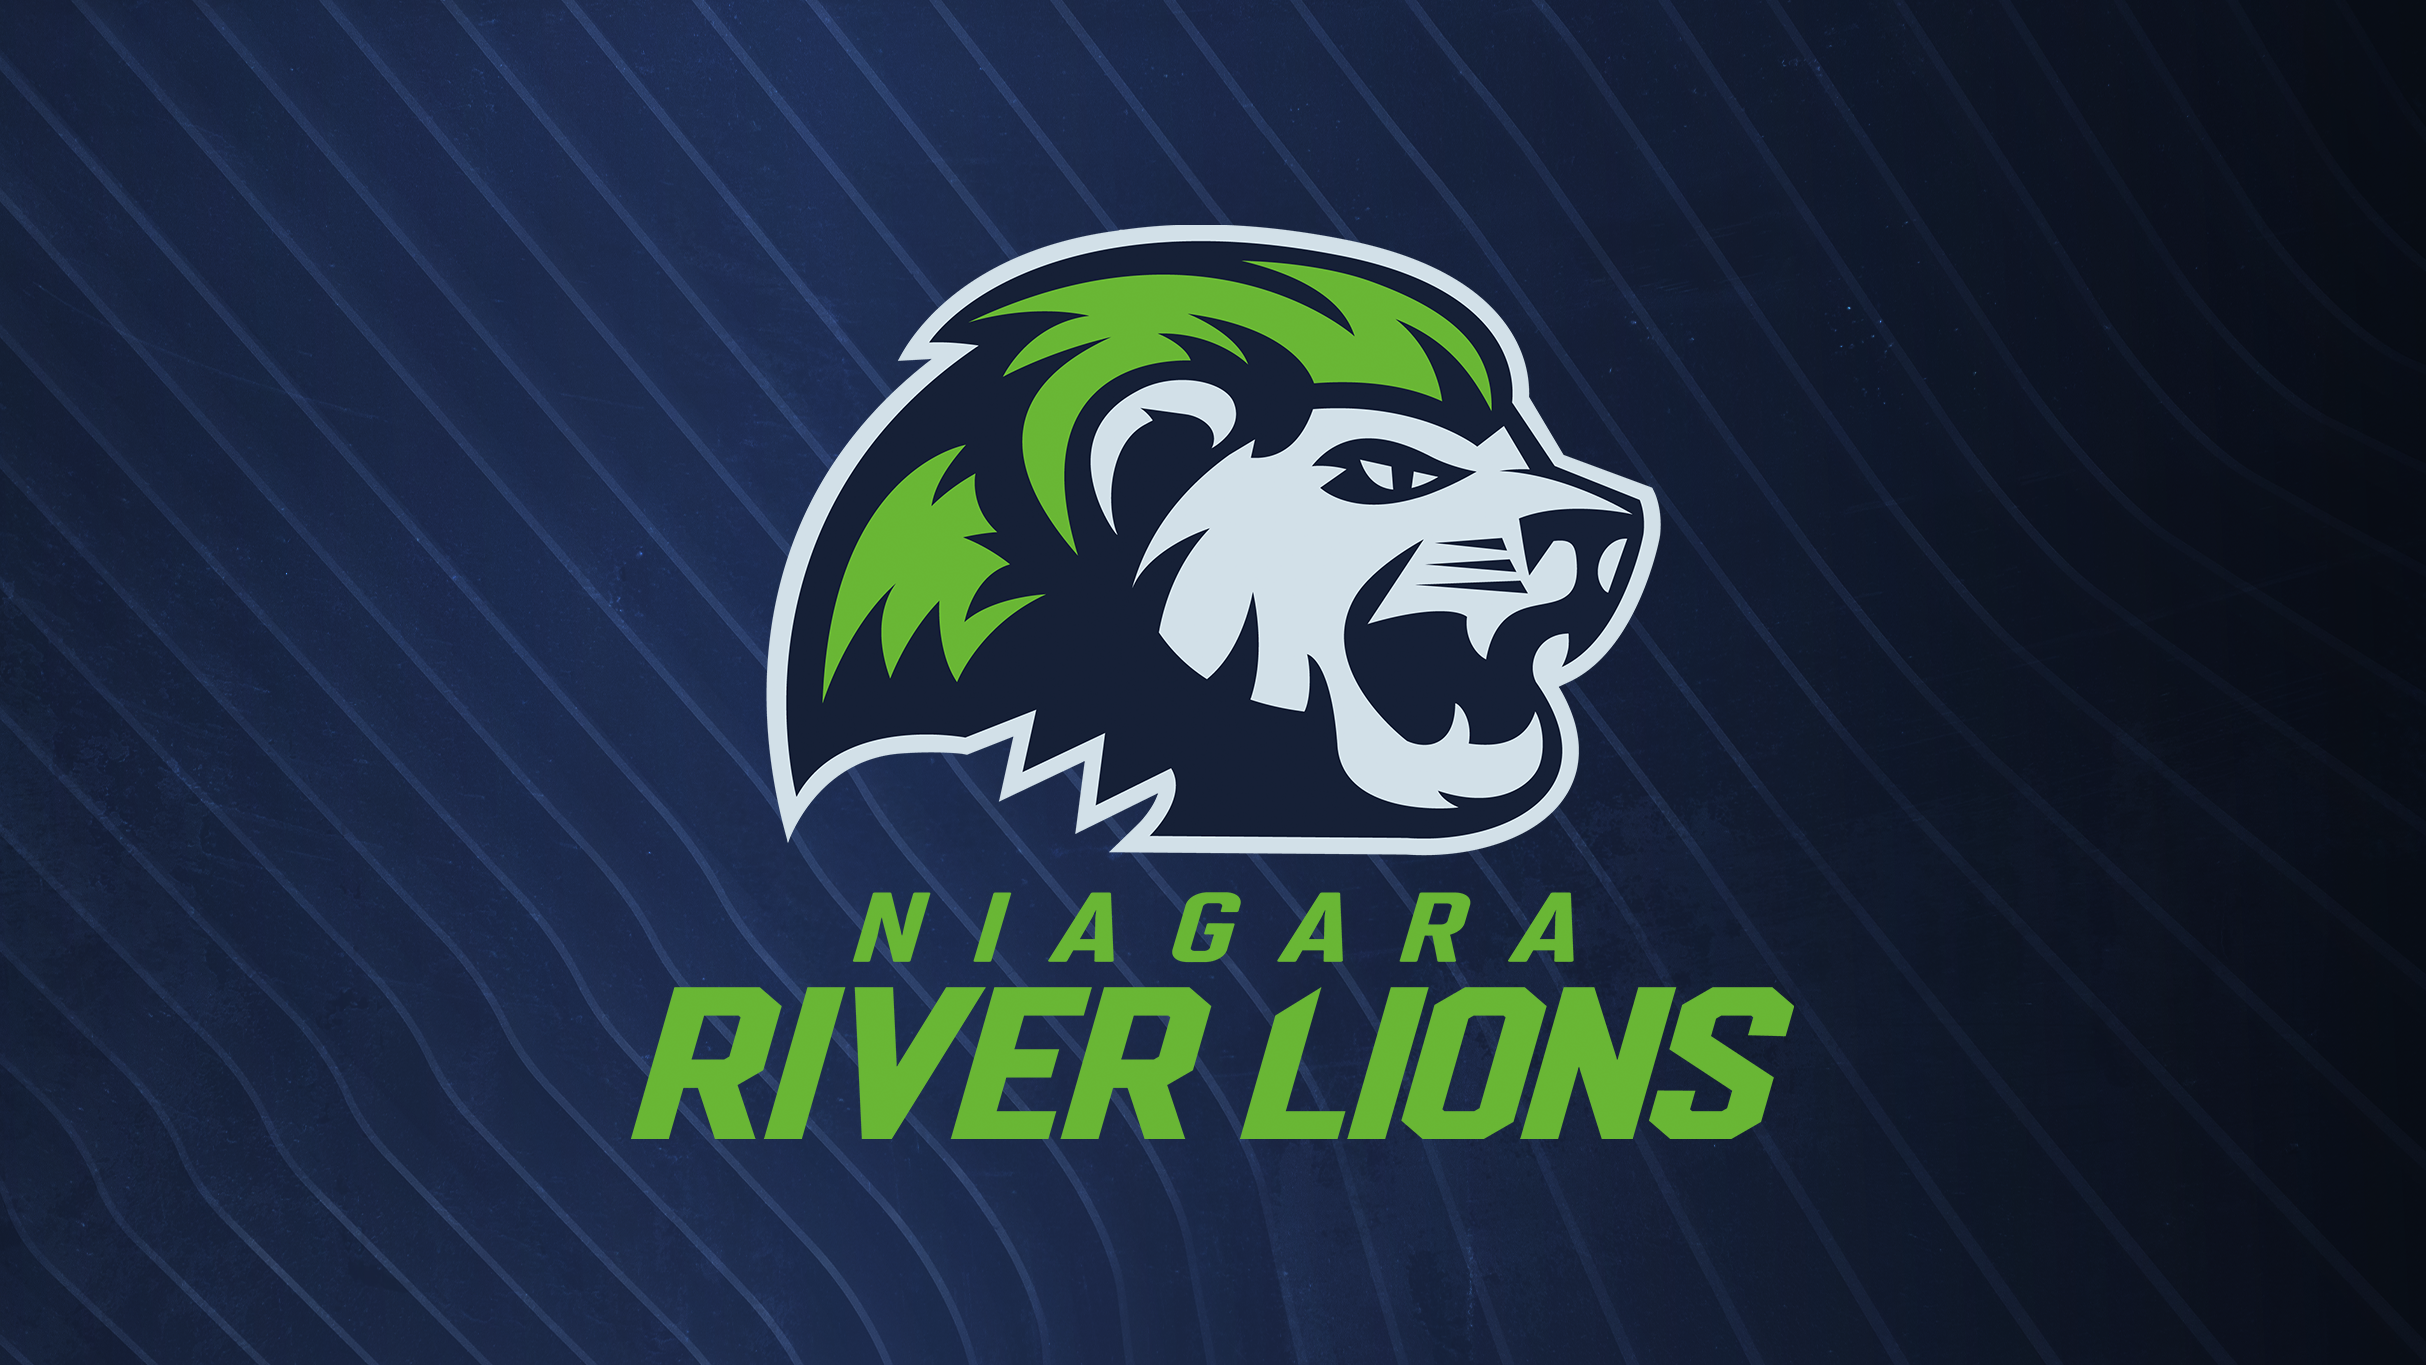 Niagara River Lions pre-sale password for genuine tickets in St Catharines